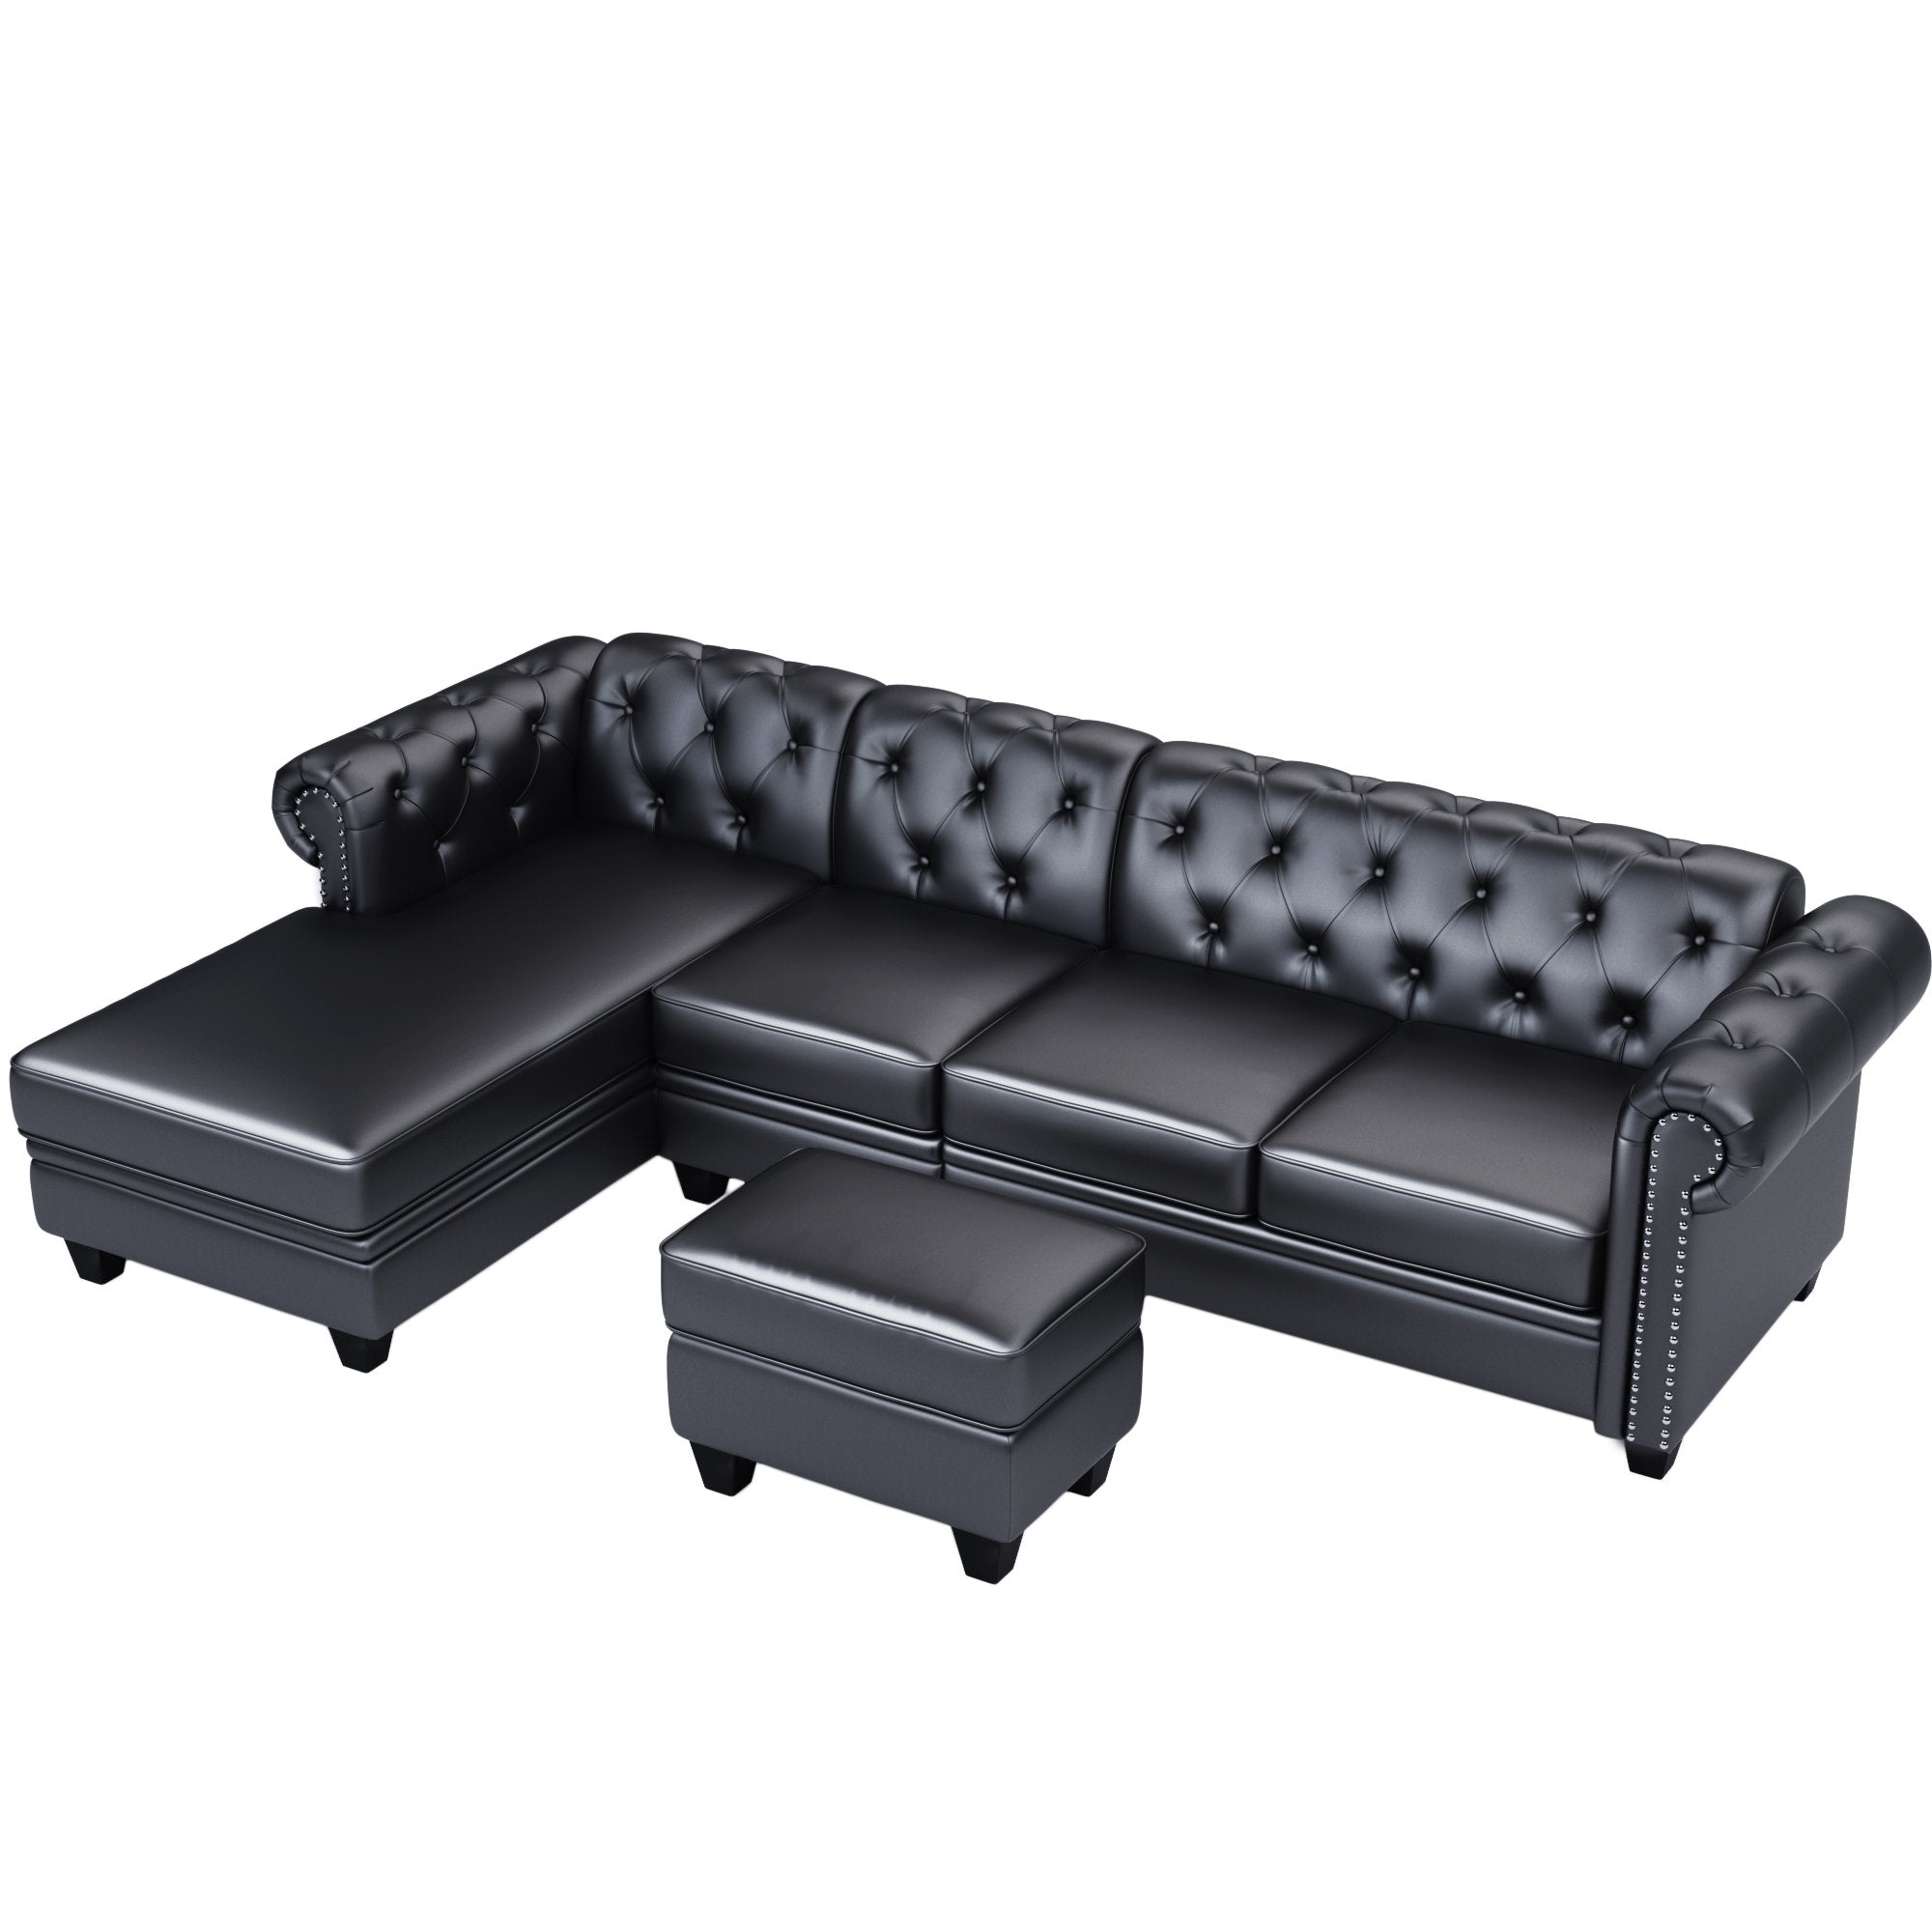 116" Chesterfield Sectional Sofa Set, PU Leather 4-Seat Living Room Set, L-Shape Couch in Home, with Storage Ottoman ,Nailheaded (Left Hand Facing,Black)-Boyel Living